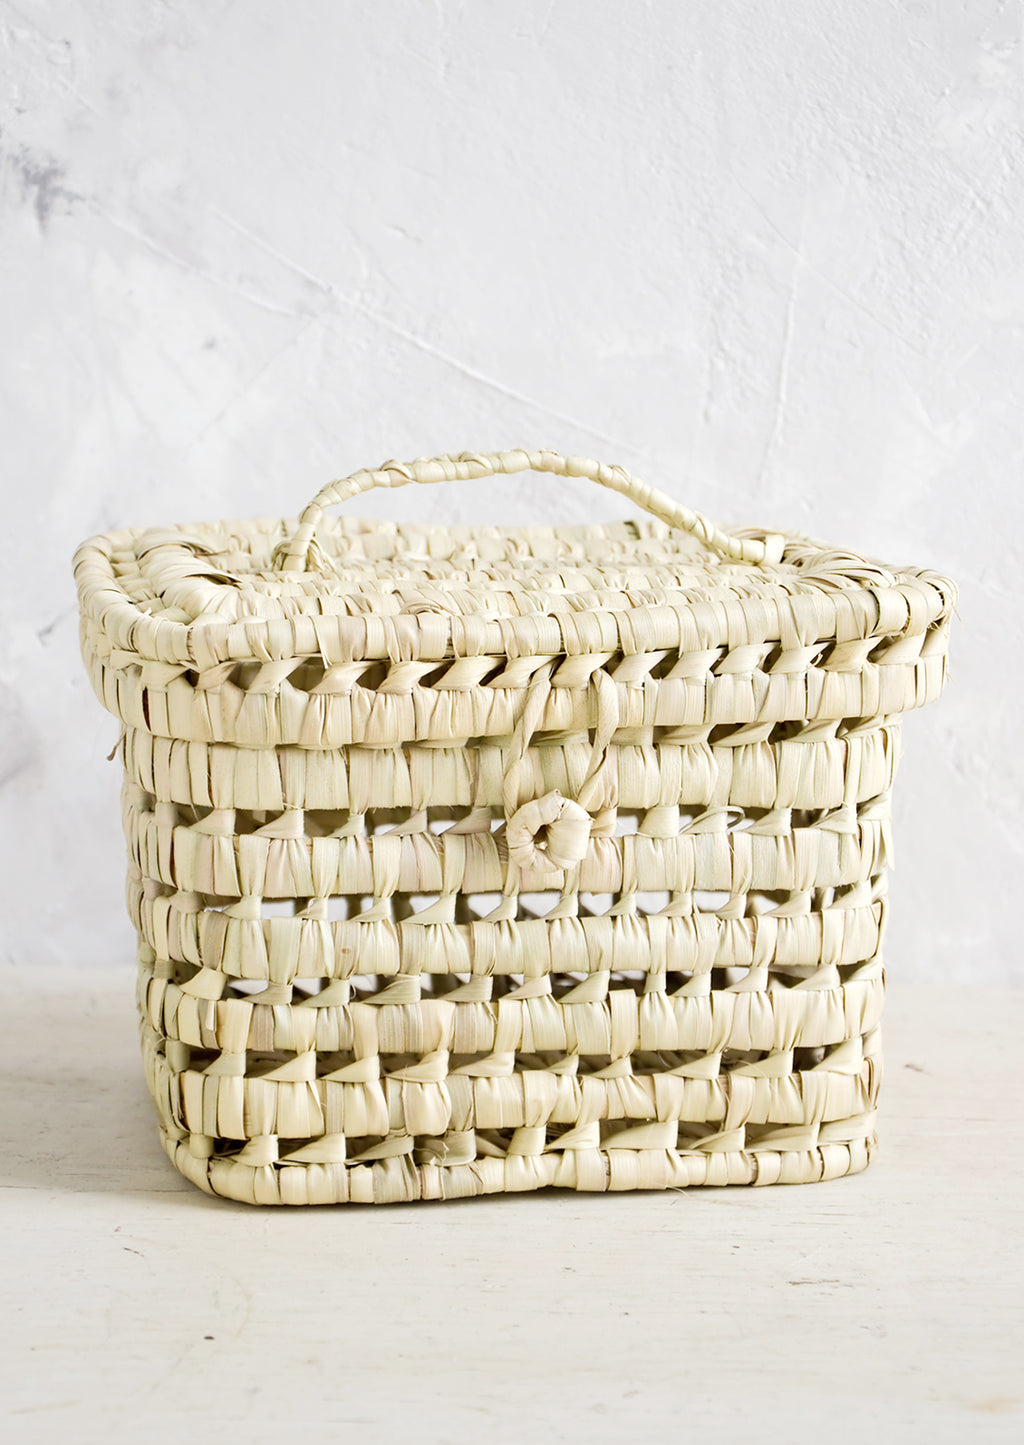 3: A square-shaped, lidded basket made from woven natural palm leaf.